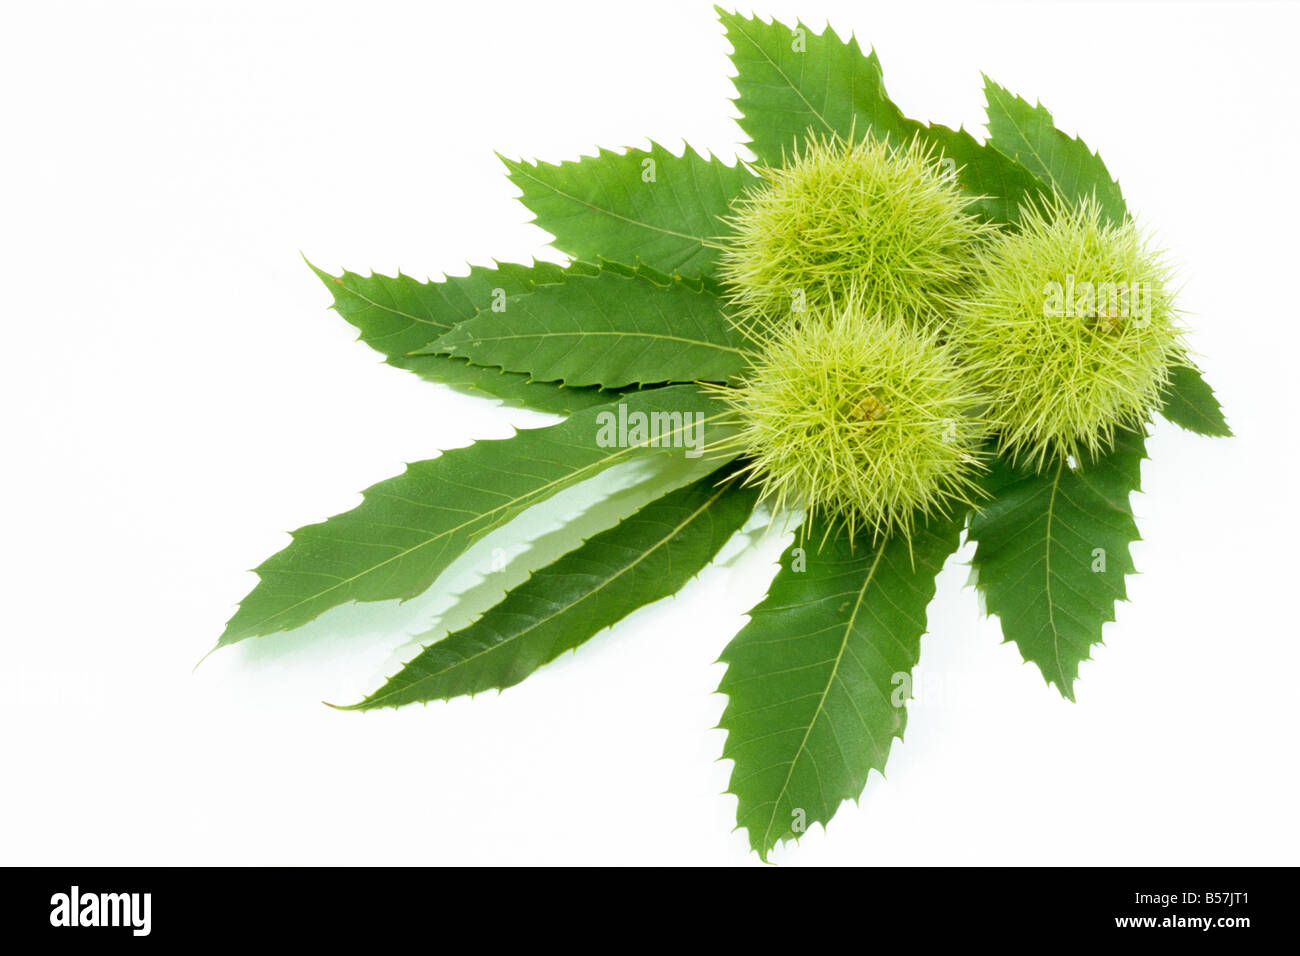 Spanish Chestnut, Sweet Chestnut (Castanea sativa), edible chestnuts and leaves, studio picture Stock Photo